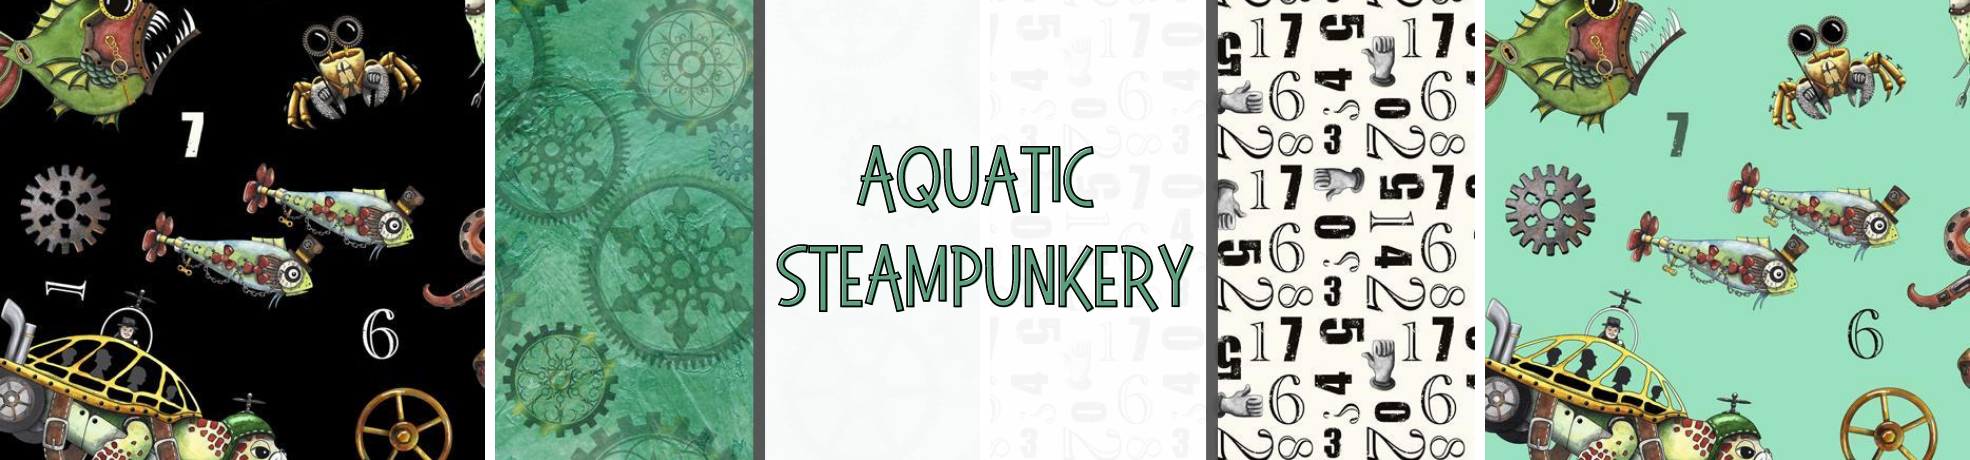 Aquatic Steampunkery Fabric Collection